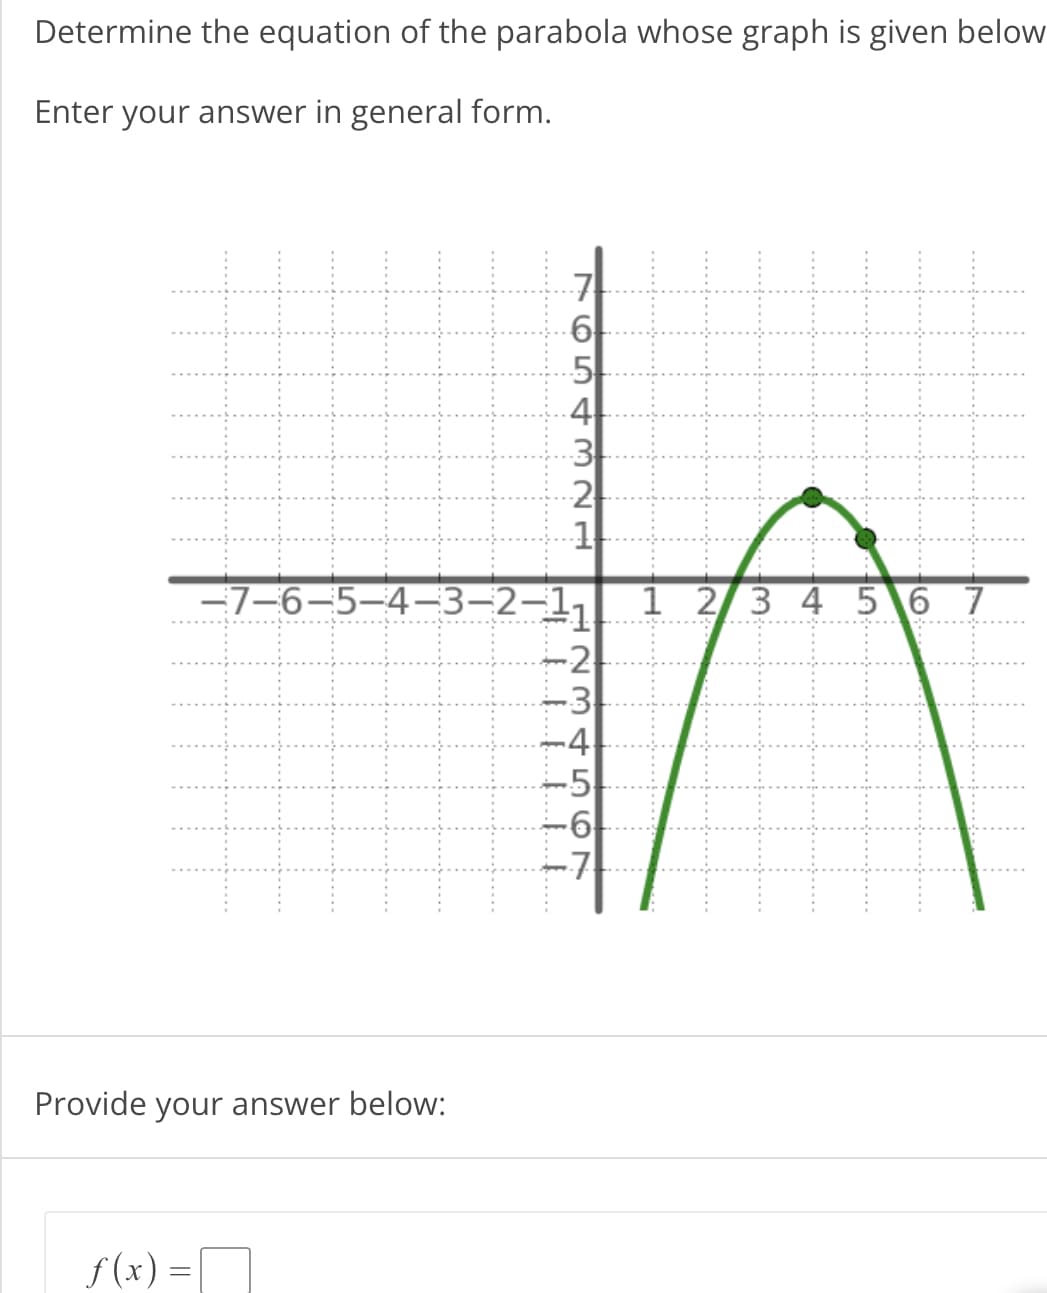 Determine the equation of the parabola whose graph is given below
Enter your answer in general form.
Provide your answer below:
f(x) =
765432
IT
6
5
41
−7–6—5—4—3—2–11
LLLI
3
2
1
-2
123 +
-3
-4
567
-5
-6
-71
1 2 3 4 5 6 7